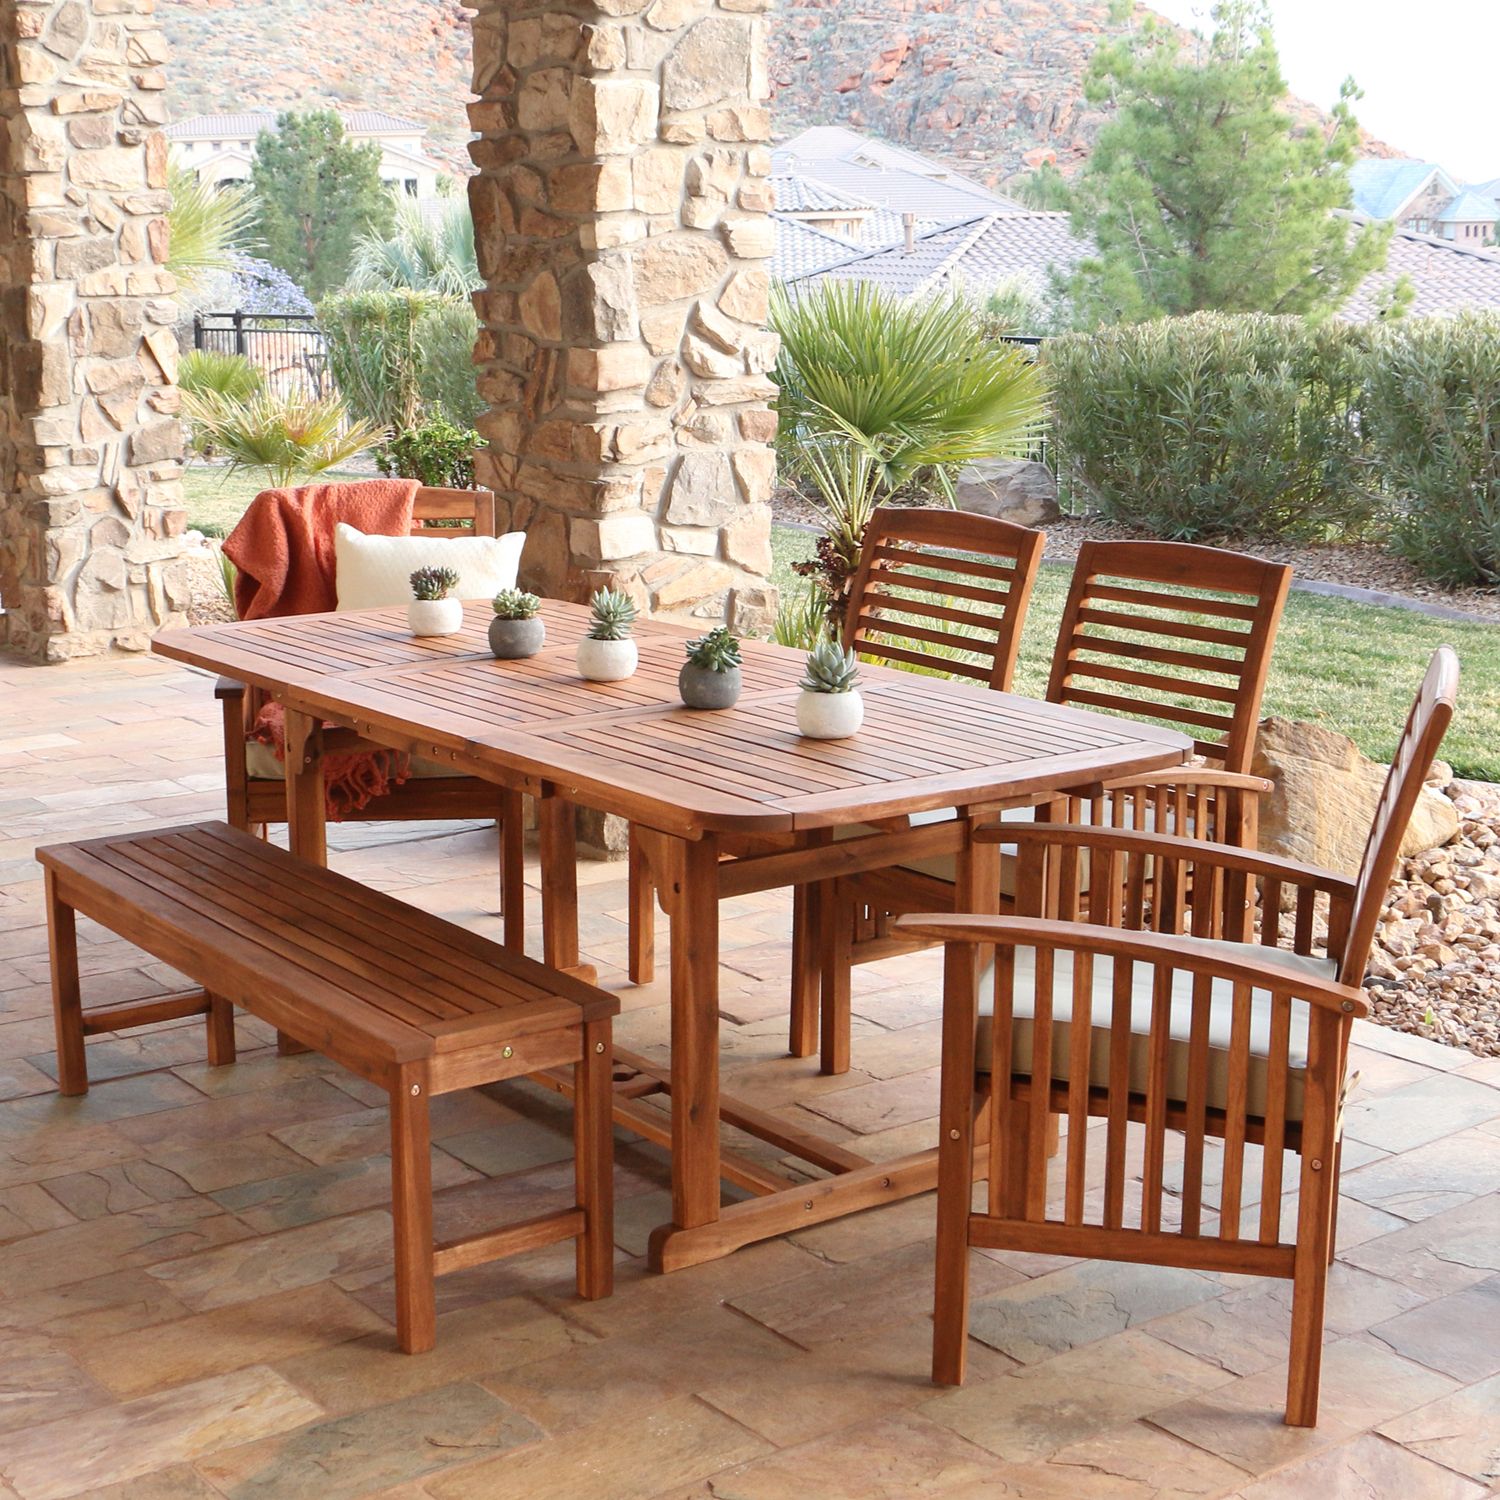 Trendy Brown Acacia Patio Dining Sets In Brown Acacia Wood 6 Piece Dining Set – Pier1 Imports (View 9 of 15)